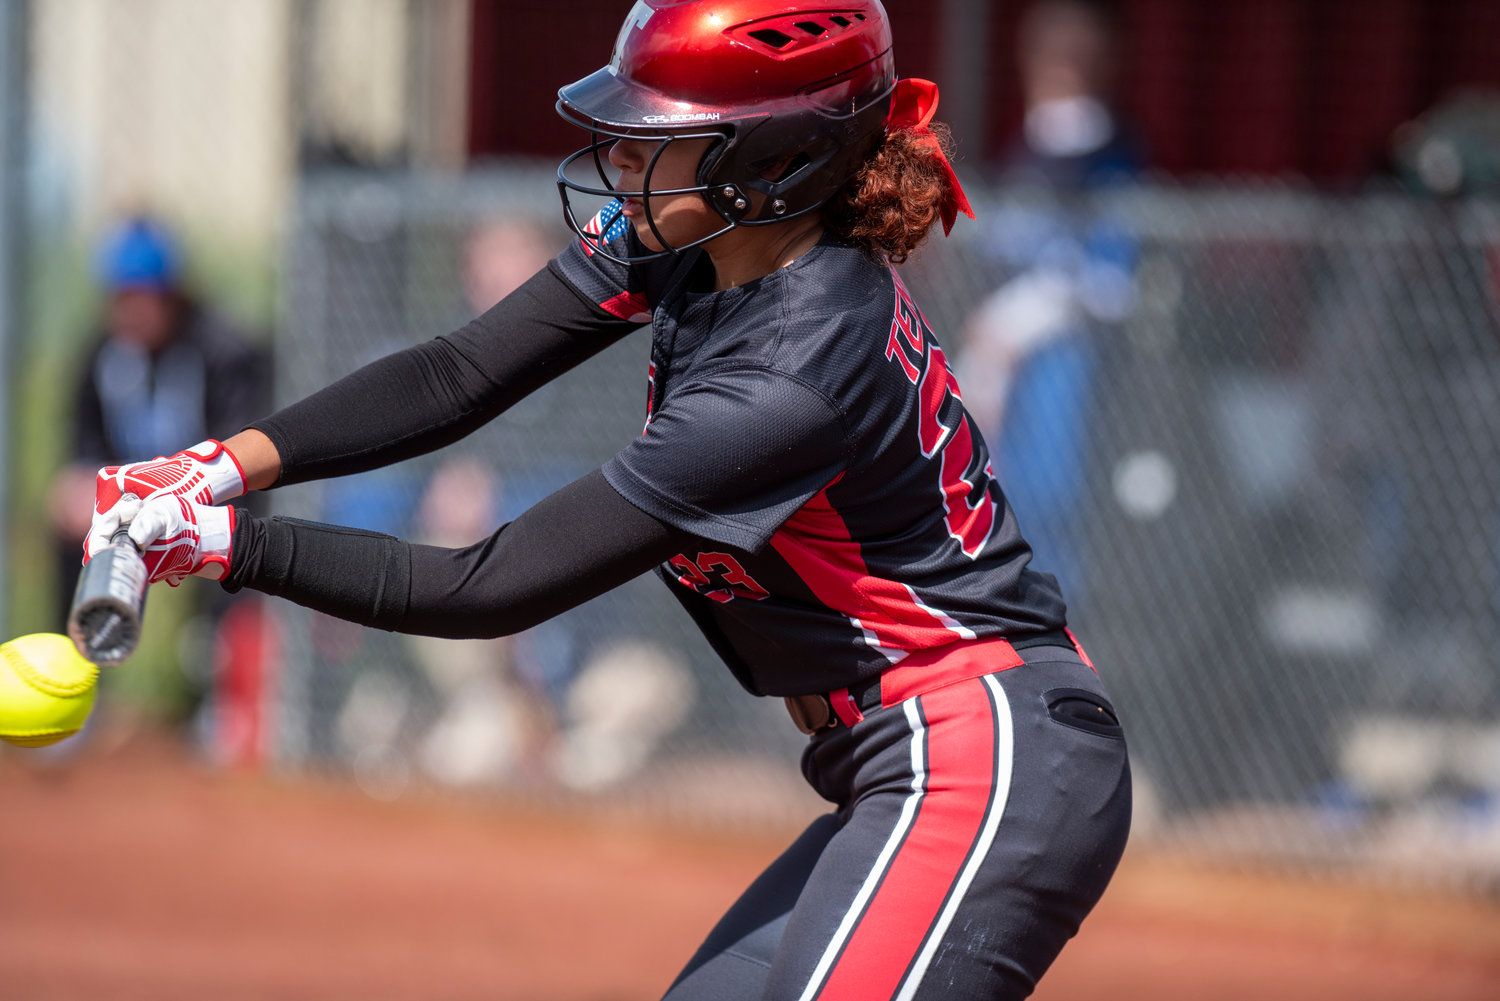 Tenino senior Alivia Hunter connects on an Elma pitch during a league home game on Tuesday, April 26.